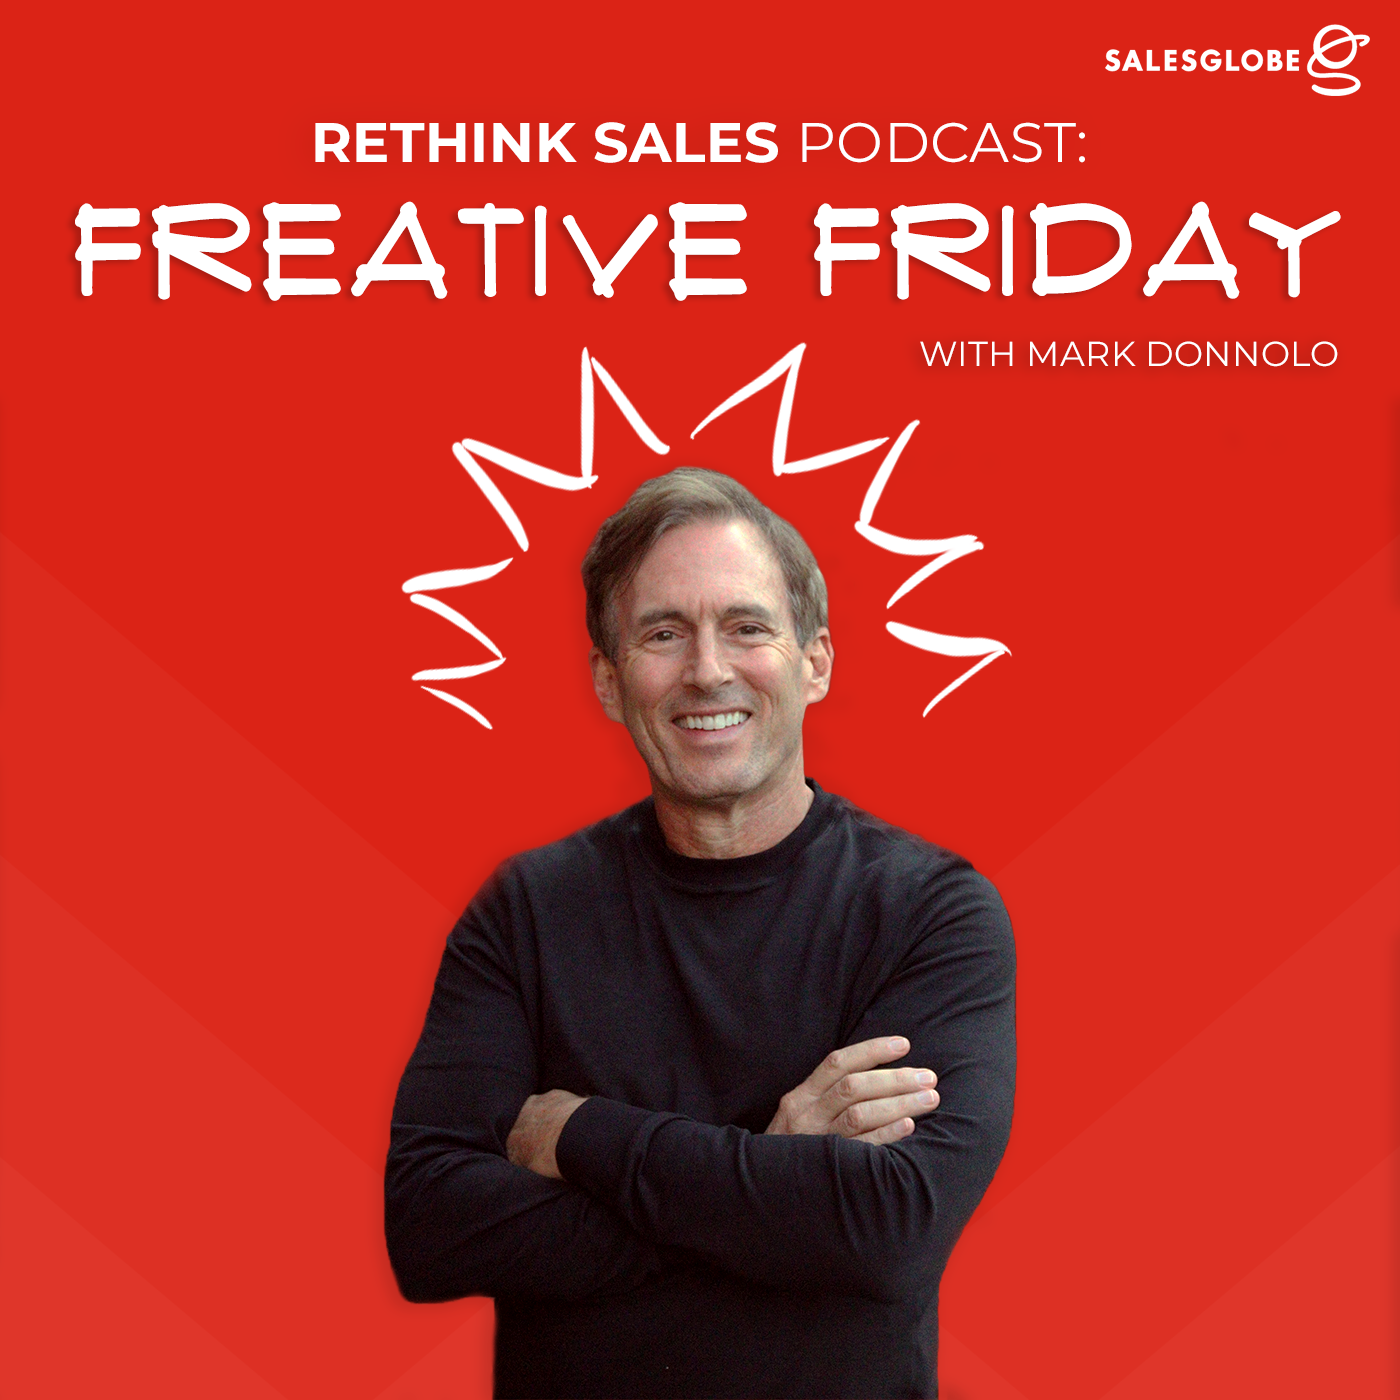 93: Freative Friday - The Art of Communication